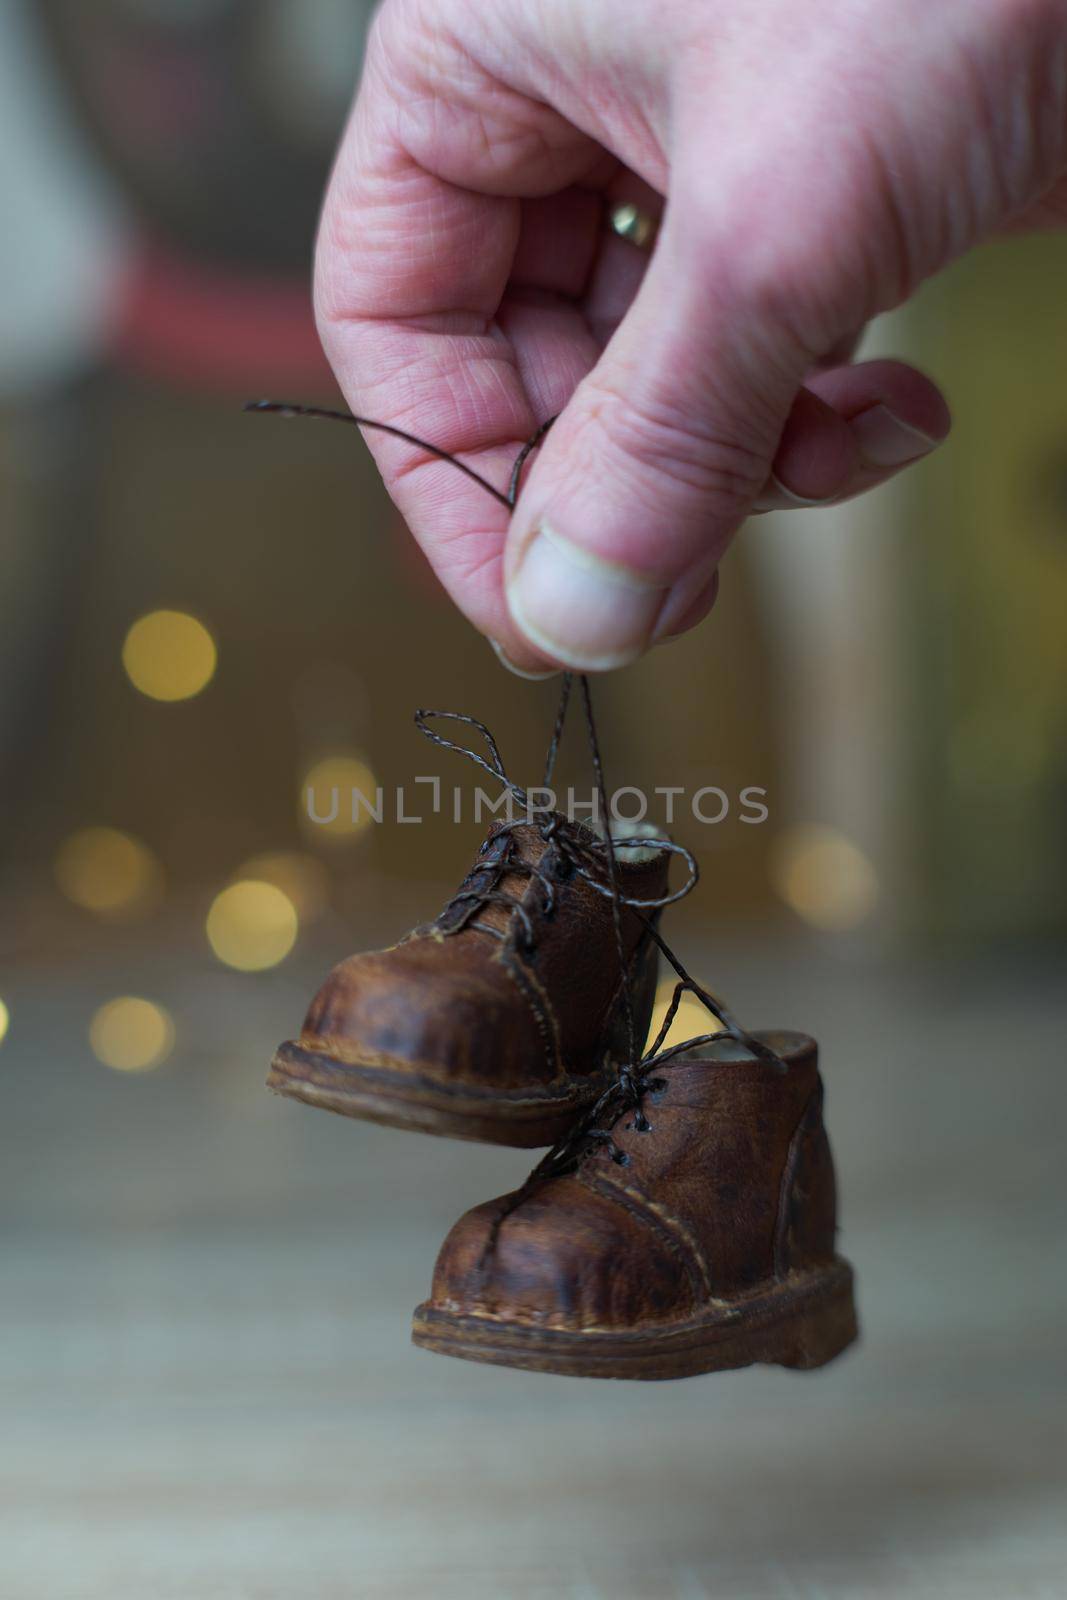 the concept of light industry for the manufacture of stylish fashionable brown leather small shoes with small feet for teddy bears or dolls and for children and their parents. High quality photo